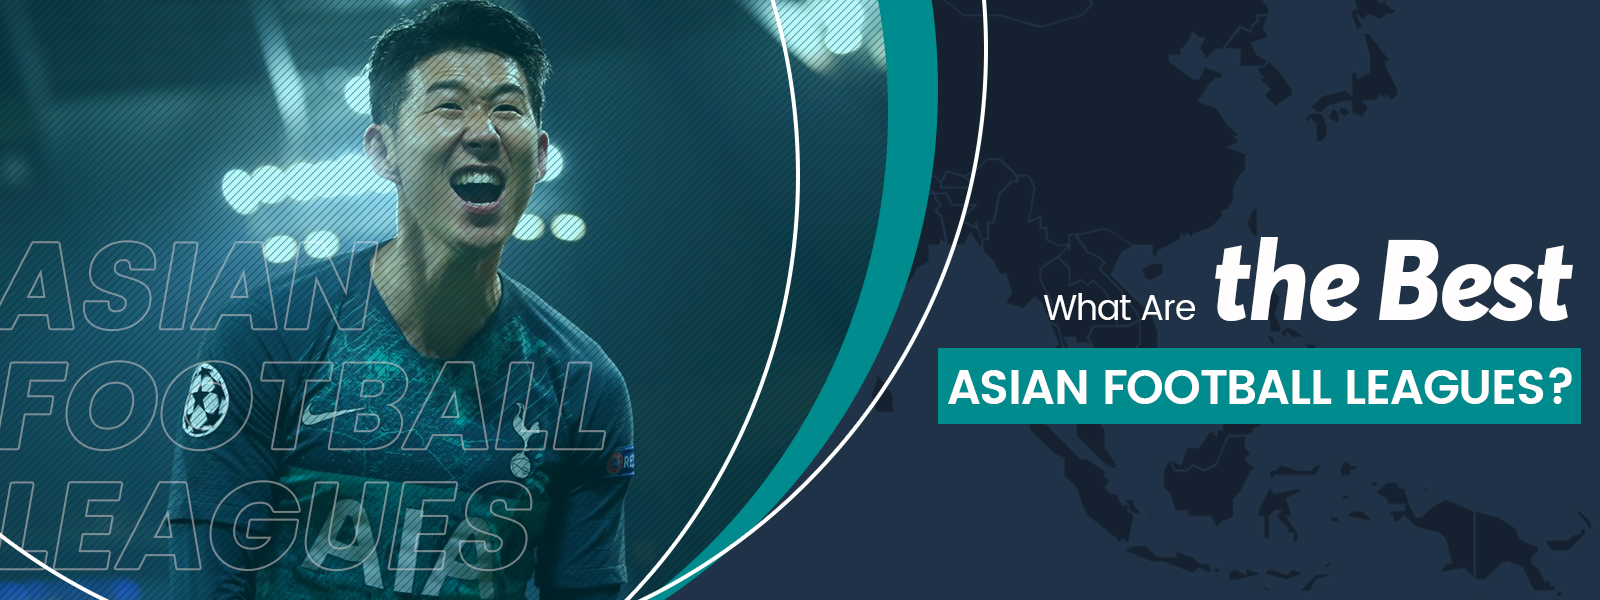 What Are The Best Asian Football Leagues?